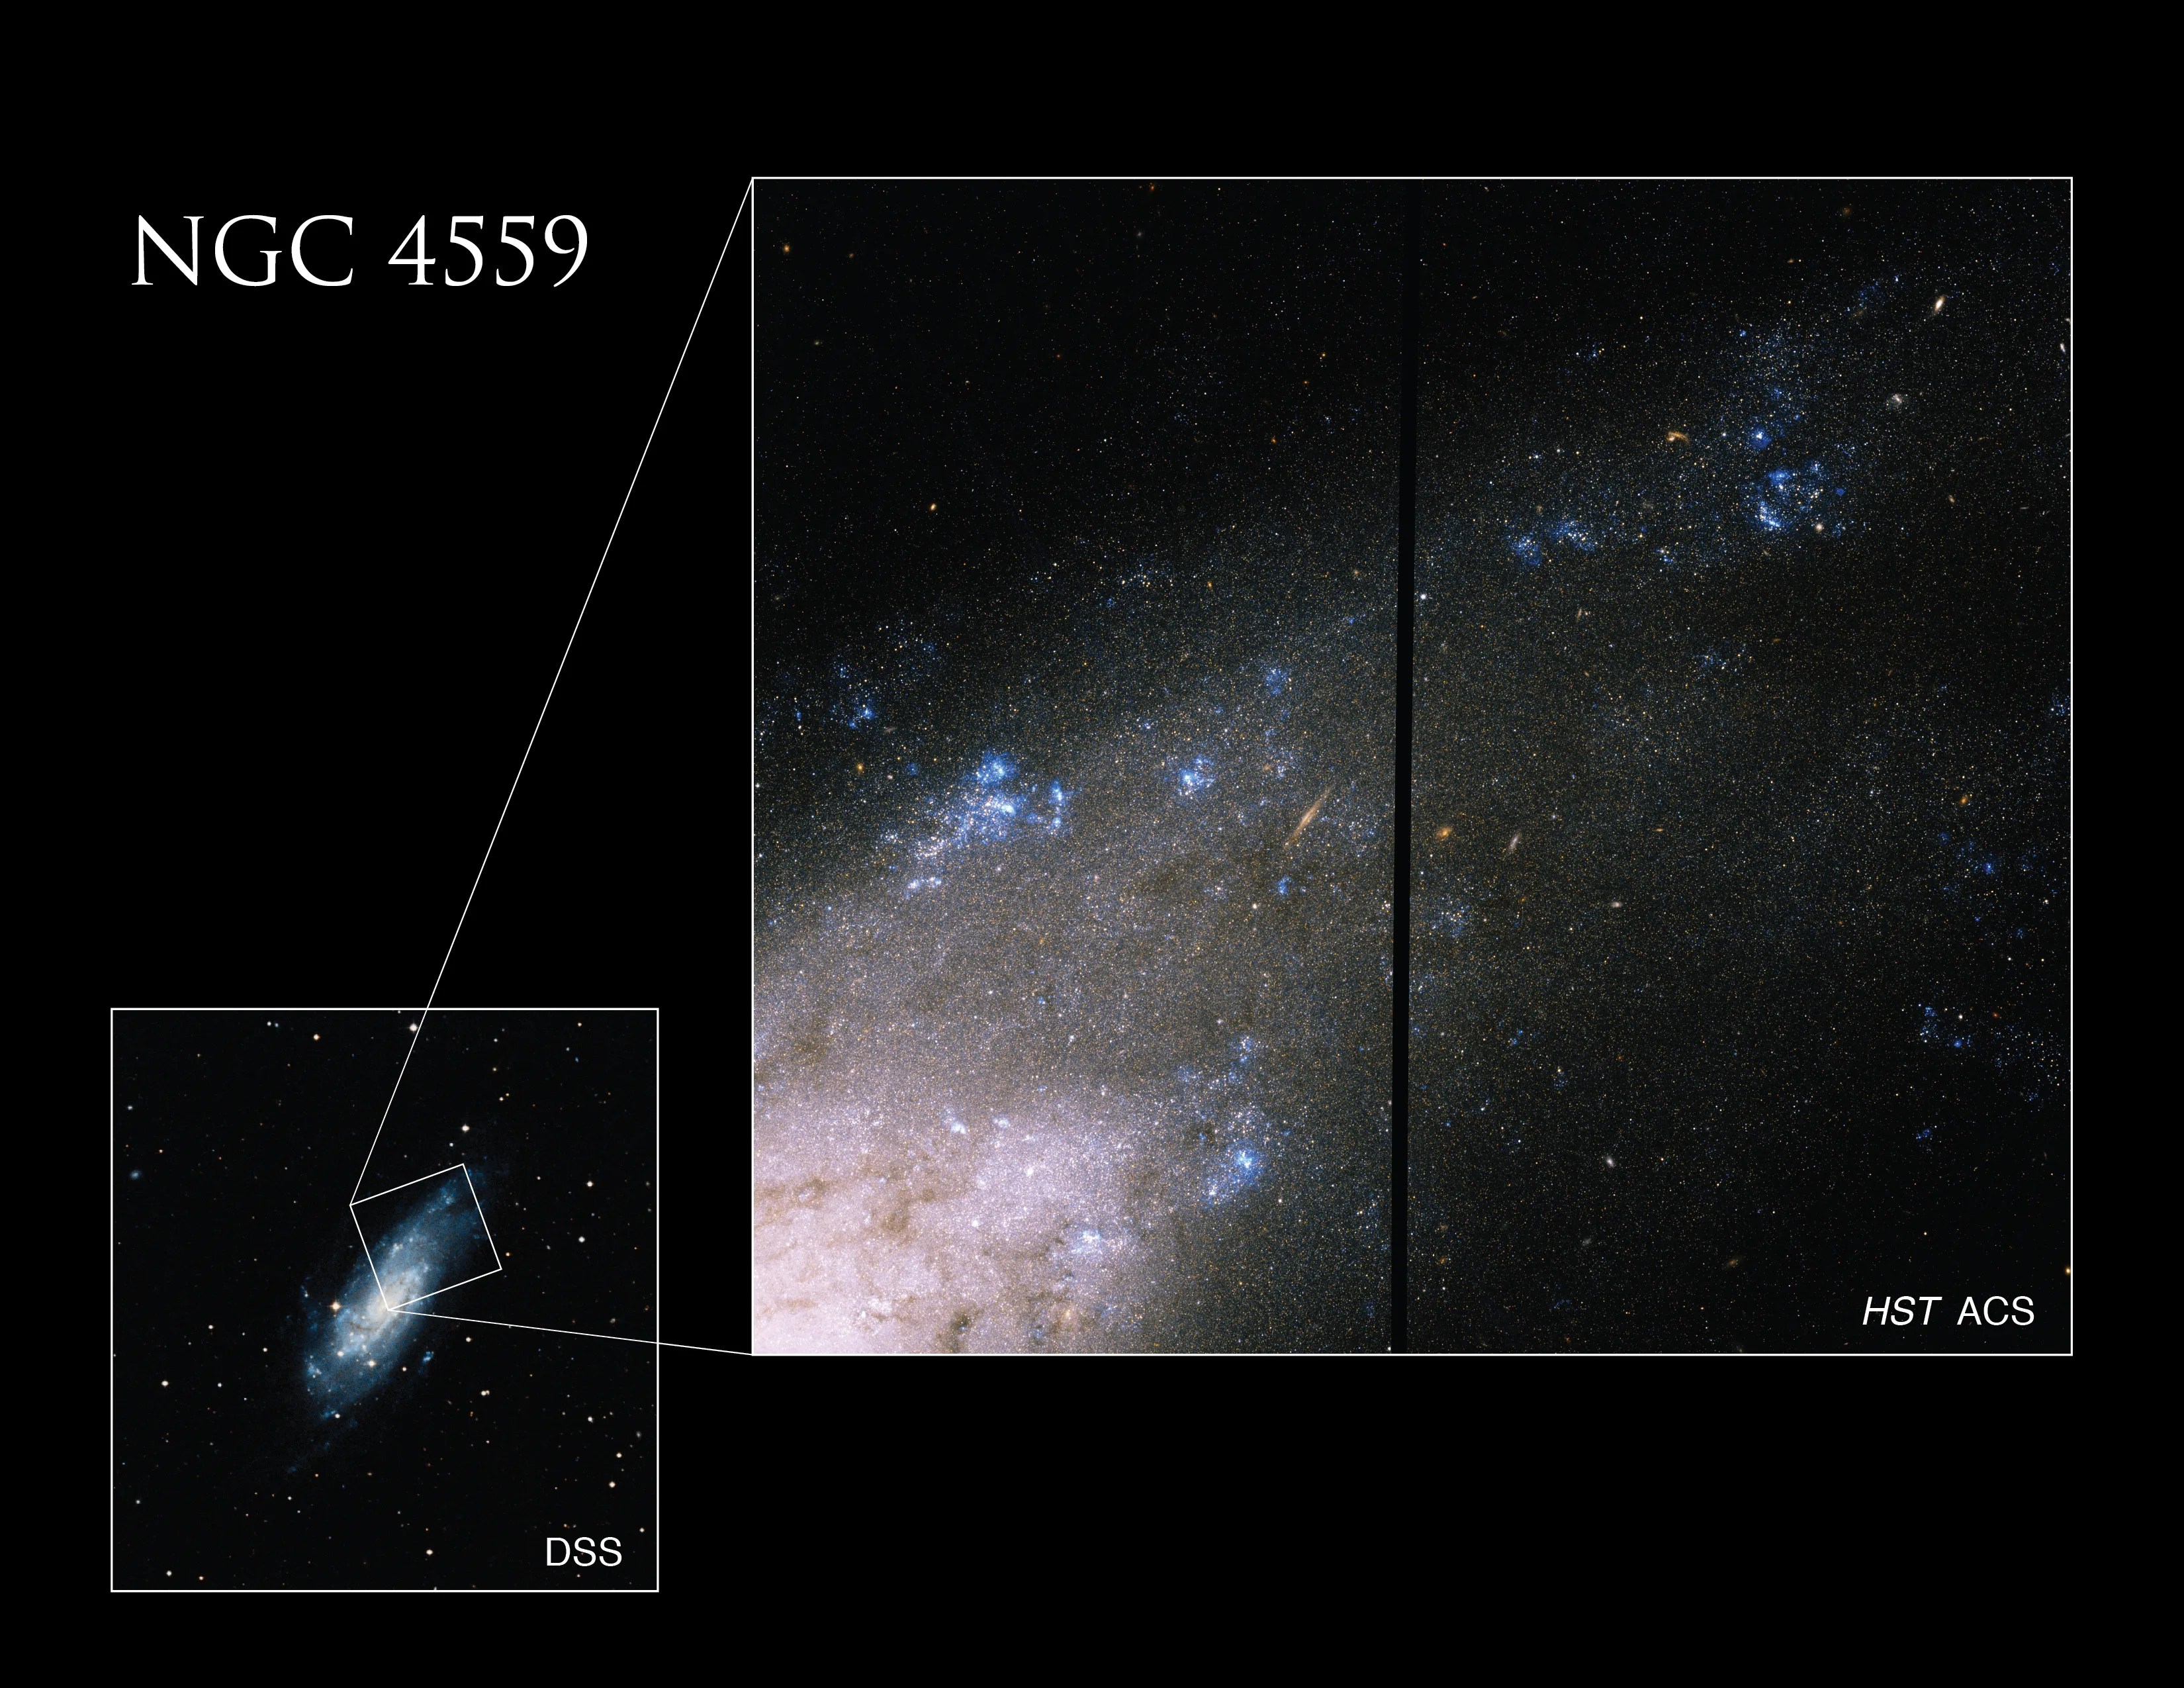 At the bottom left of the image is a picture from a ground based telescope of a galaxy on its side. There is an inset image from Hubble showing a much closer and more detailed view of one of the outer arms of that same galaxy. Blue stars and lots of gas and dust.